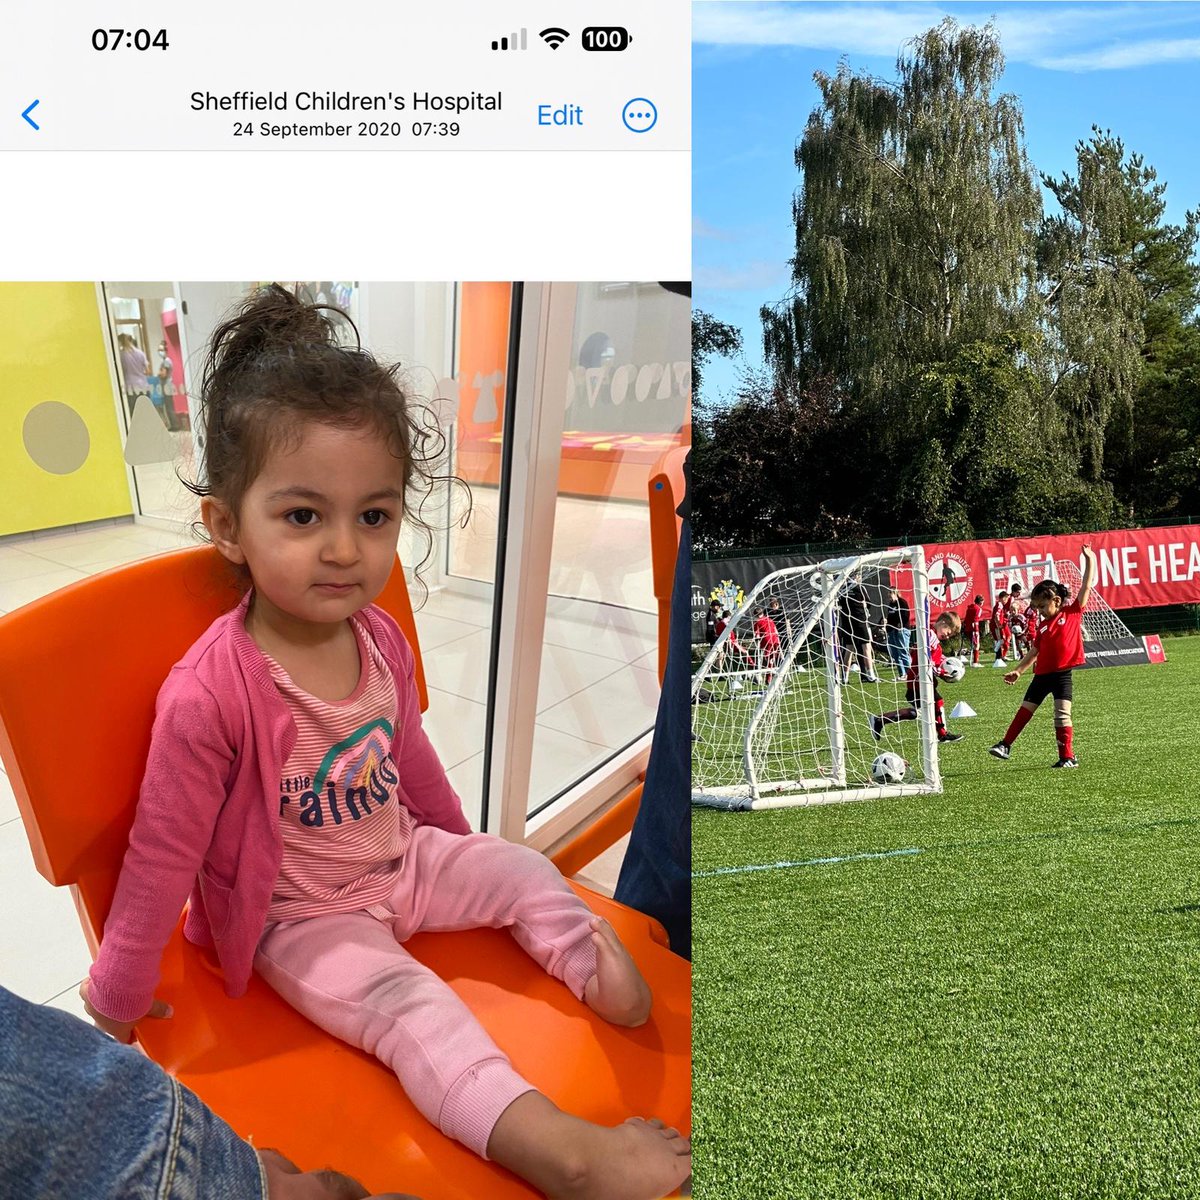 Today marks a significant milestone in Jeevna's journey. Three years ago, she underwent amputation, forever altering her life. Today, we find ourselves at the England Amputee Football Association.

What an AMAZING story! What a brave girl. #amputeefootball